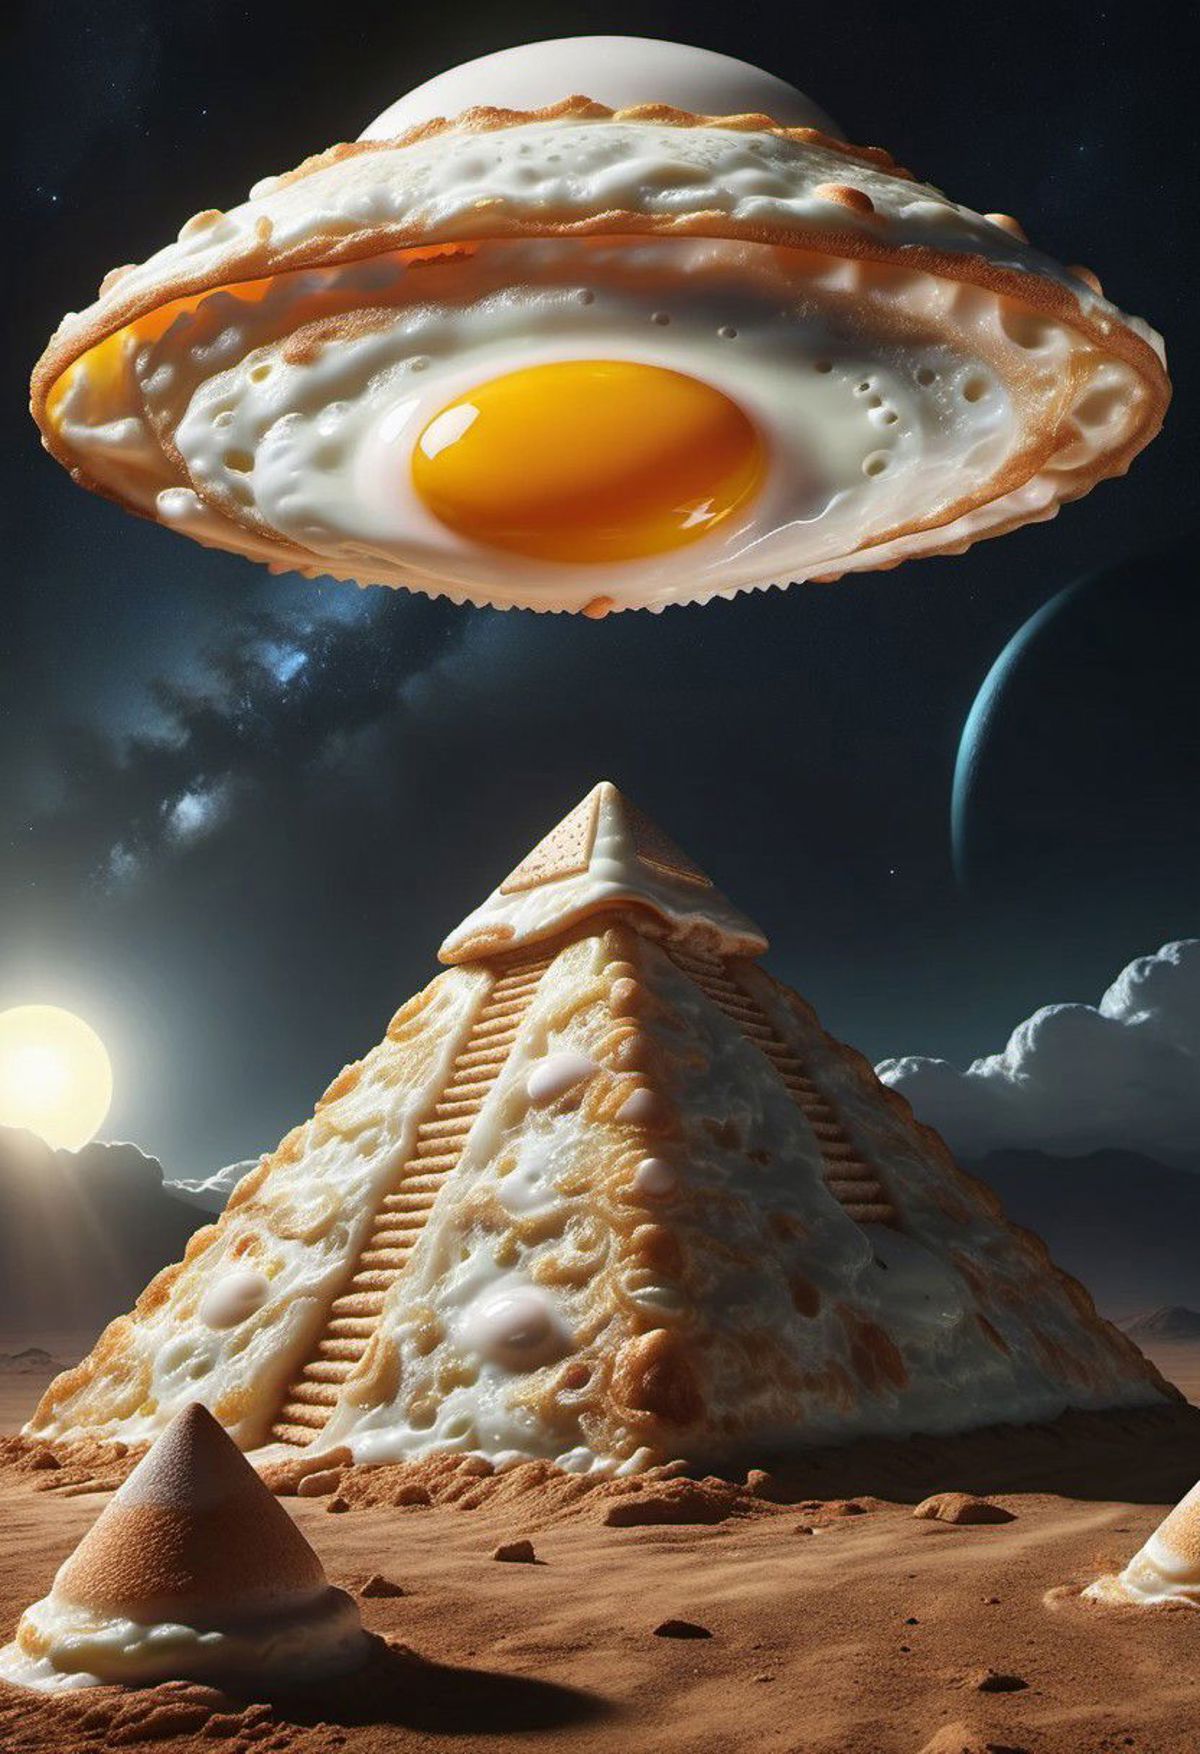 A fried egg on top of a sandwiched pyramid, with a sunset in the background.